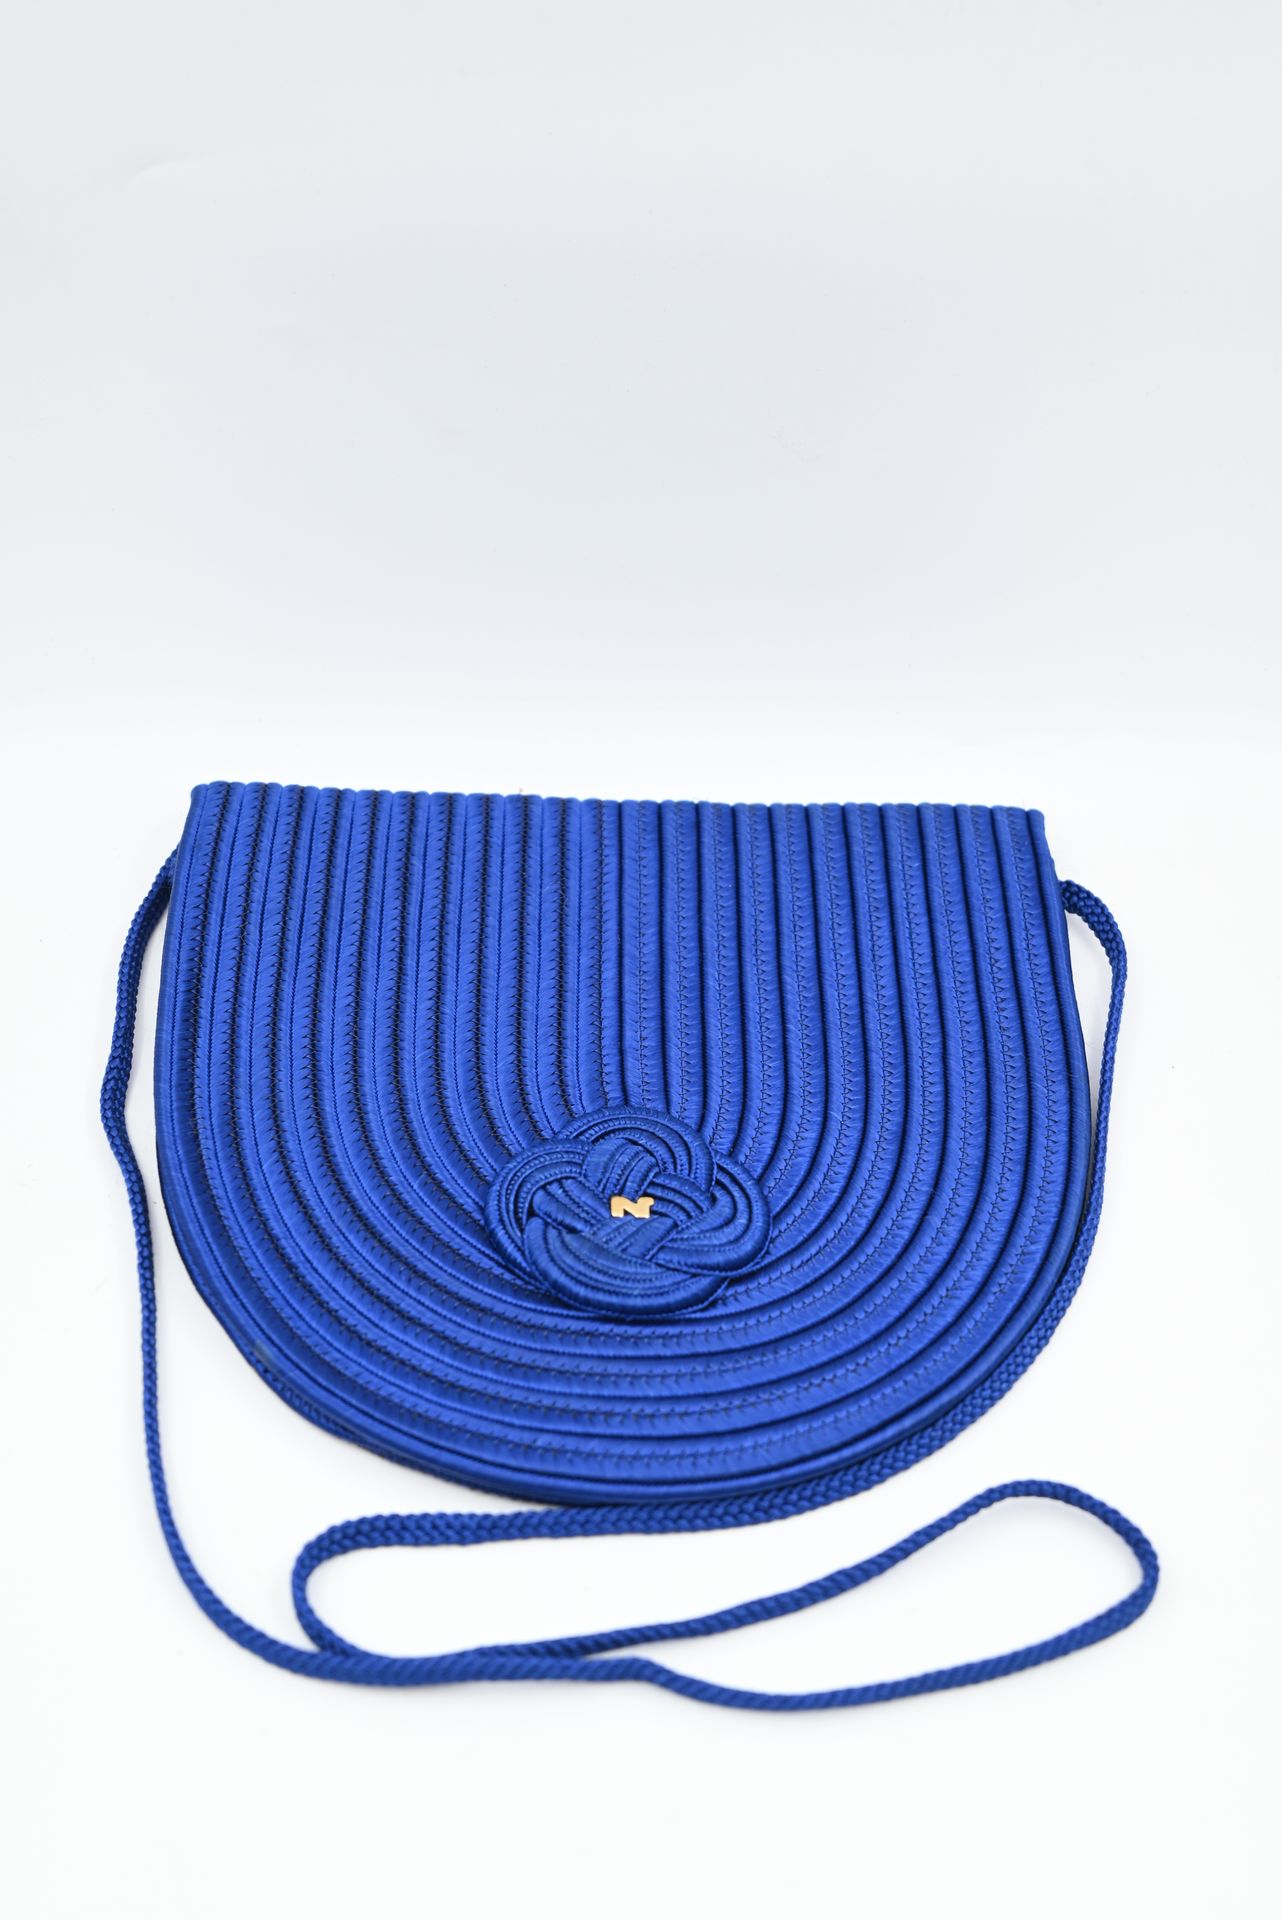 Null NINA RICCI Paris : Shoulder bag in royal blue embroidered fabric. N in gold&hellip;